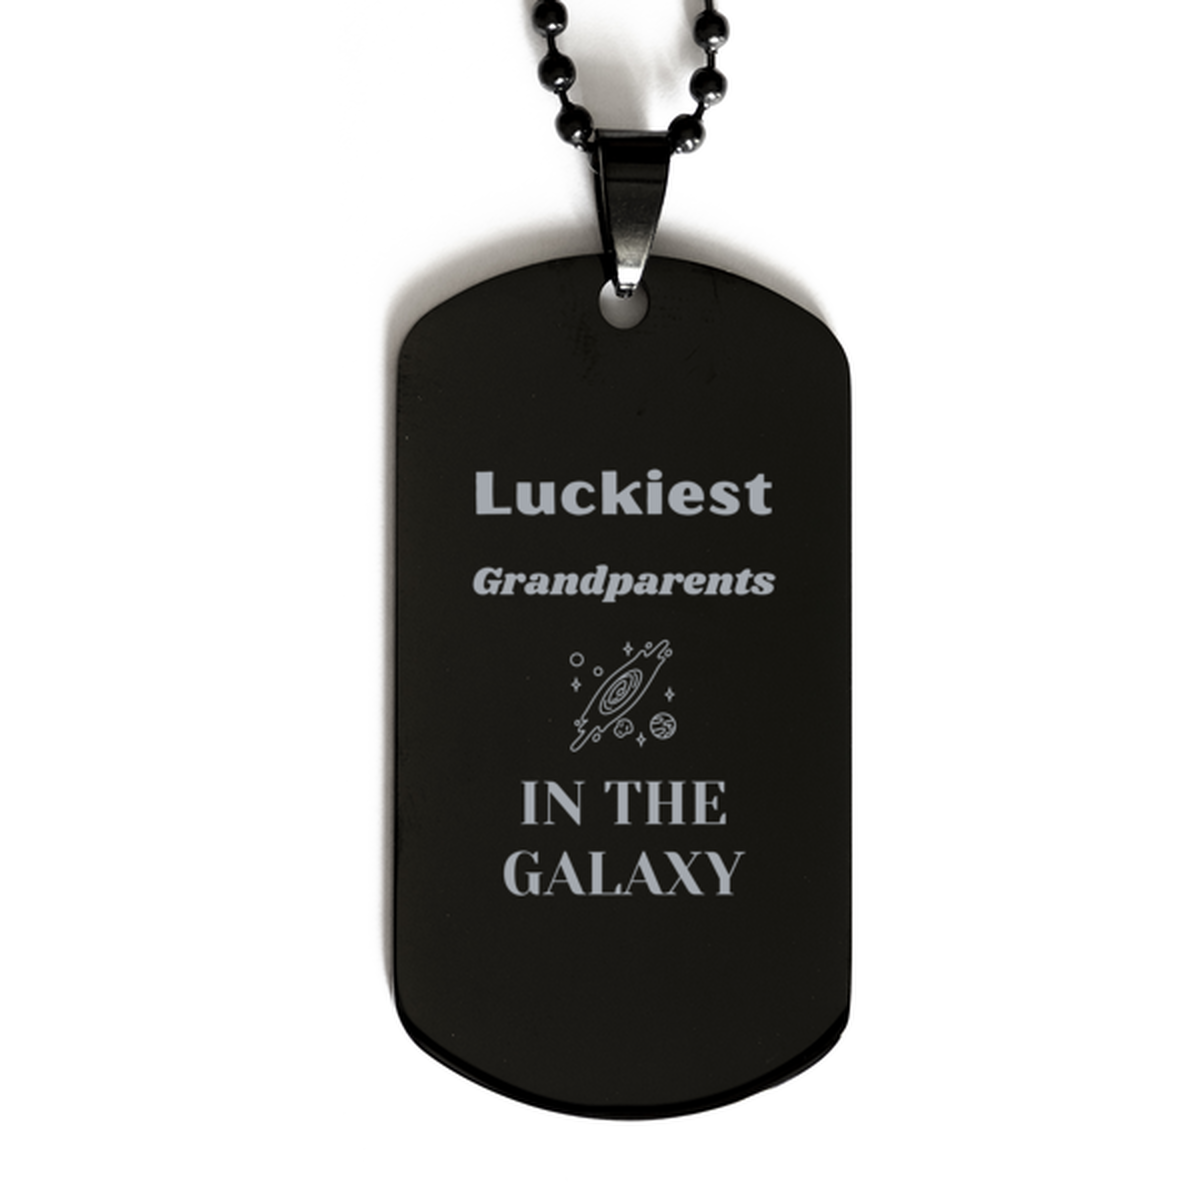 Luckiest Grandparents in the Galaxy, To My Grandparents Engraved Gifts, Christmas Grandparents Black Dog Tag Gifts, X-mas Birthday Unique Gifts For Grandparents Men Women